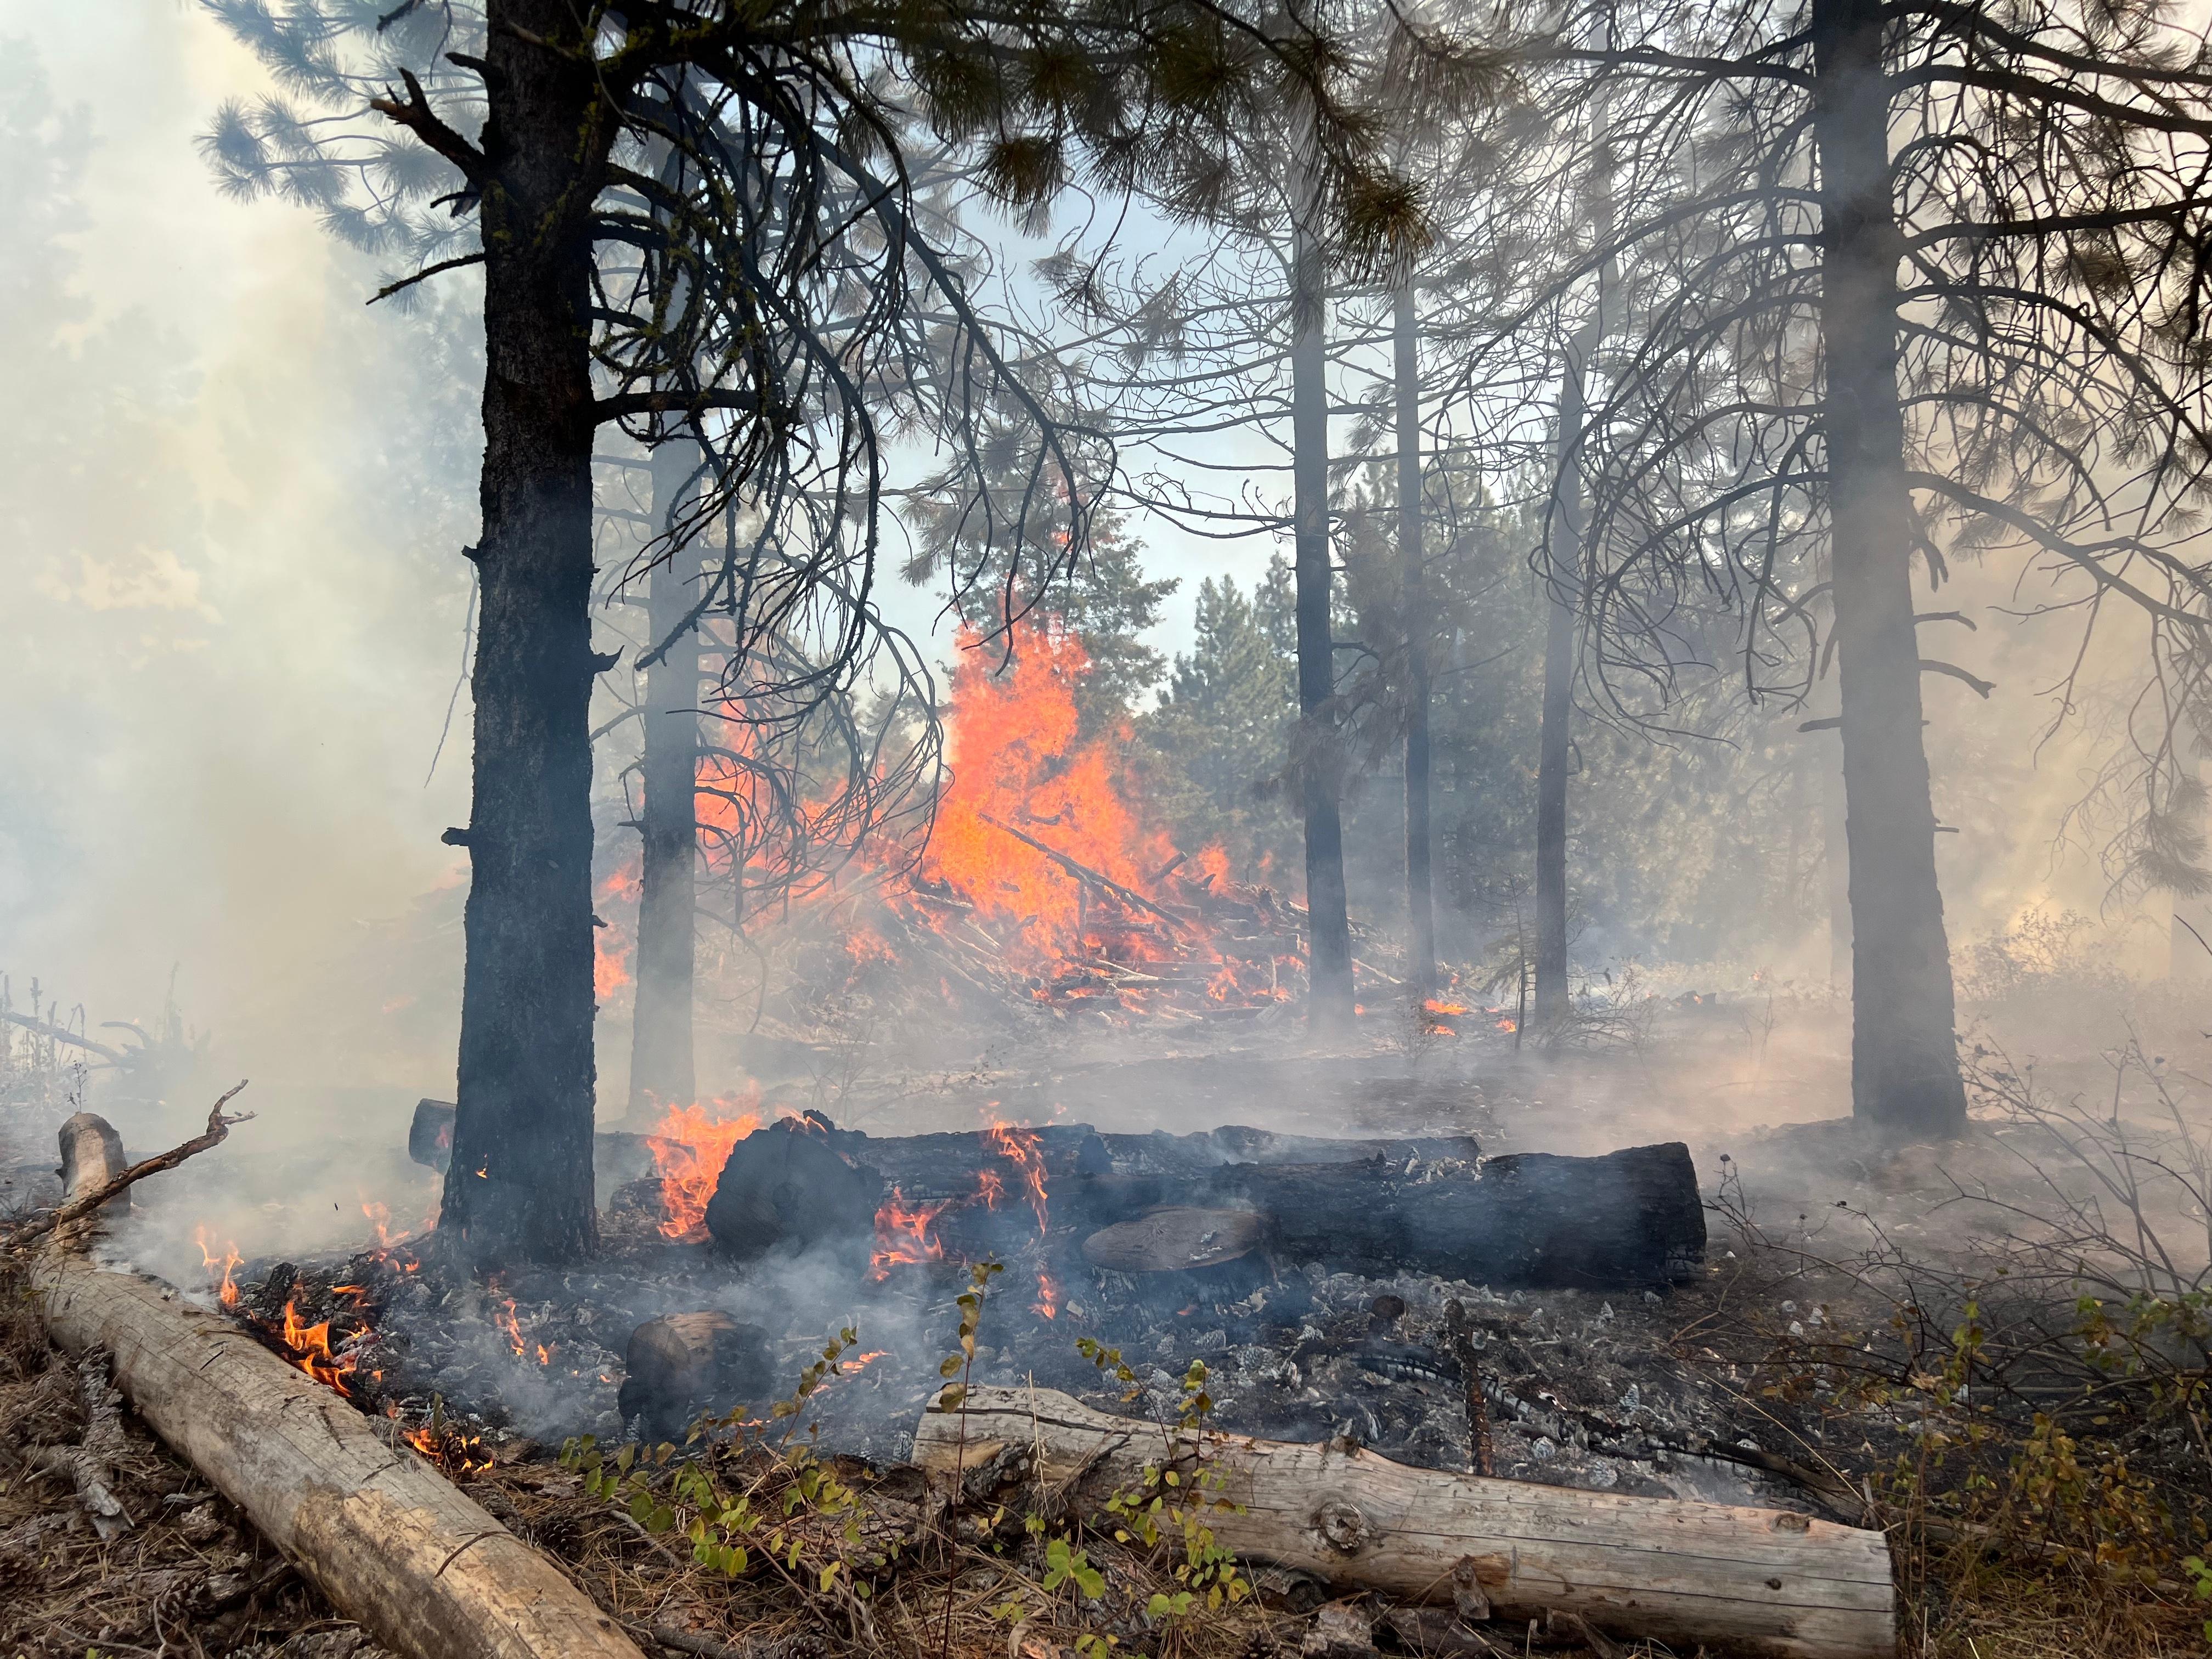 A large pile of slash (woody debris) is seen burning in the background. Downed trees and grass are burning and smoking in the foreground.